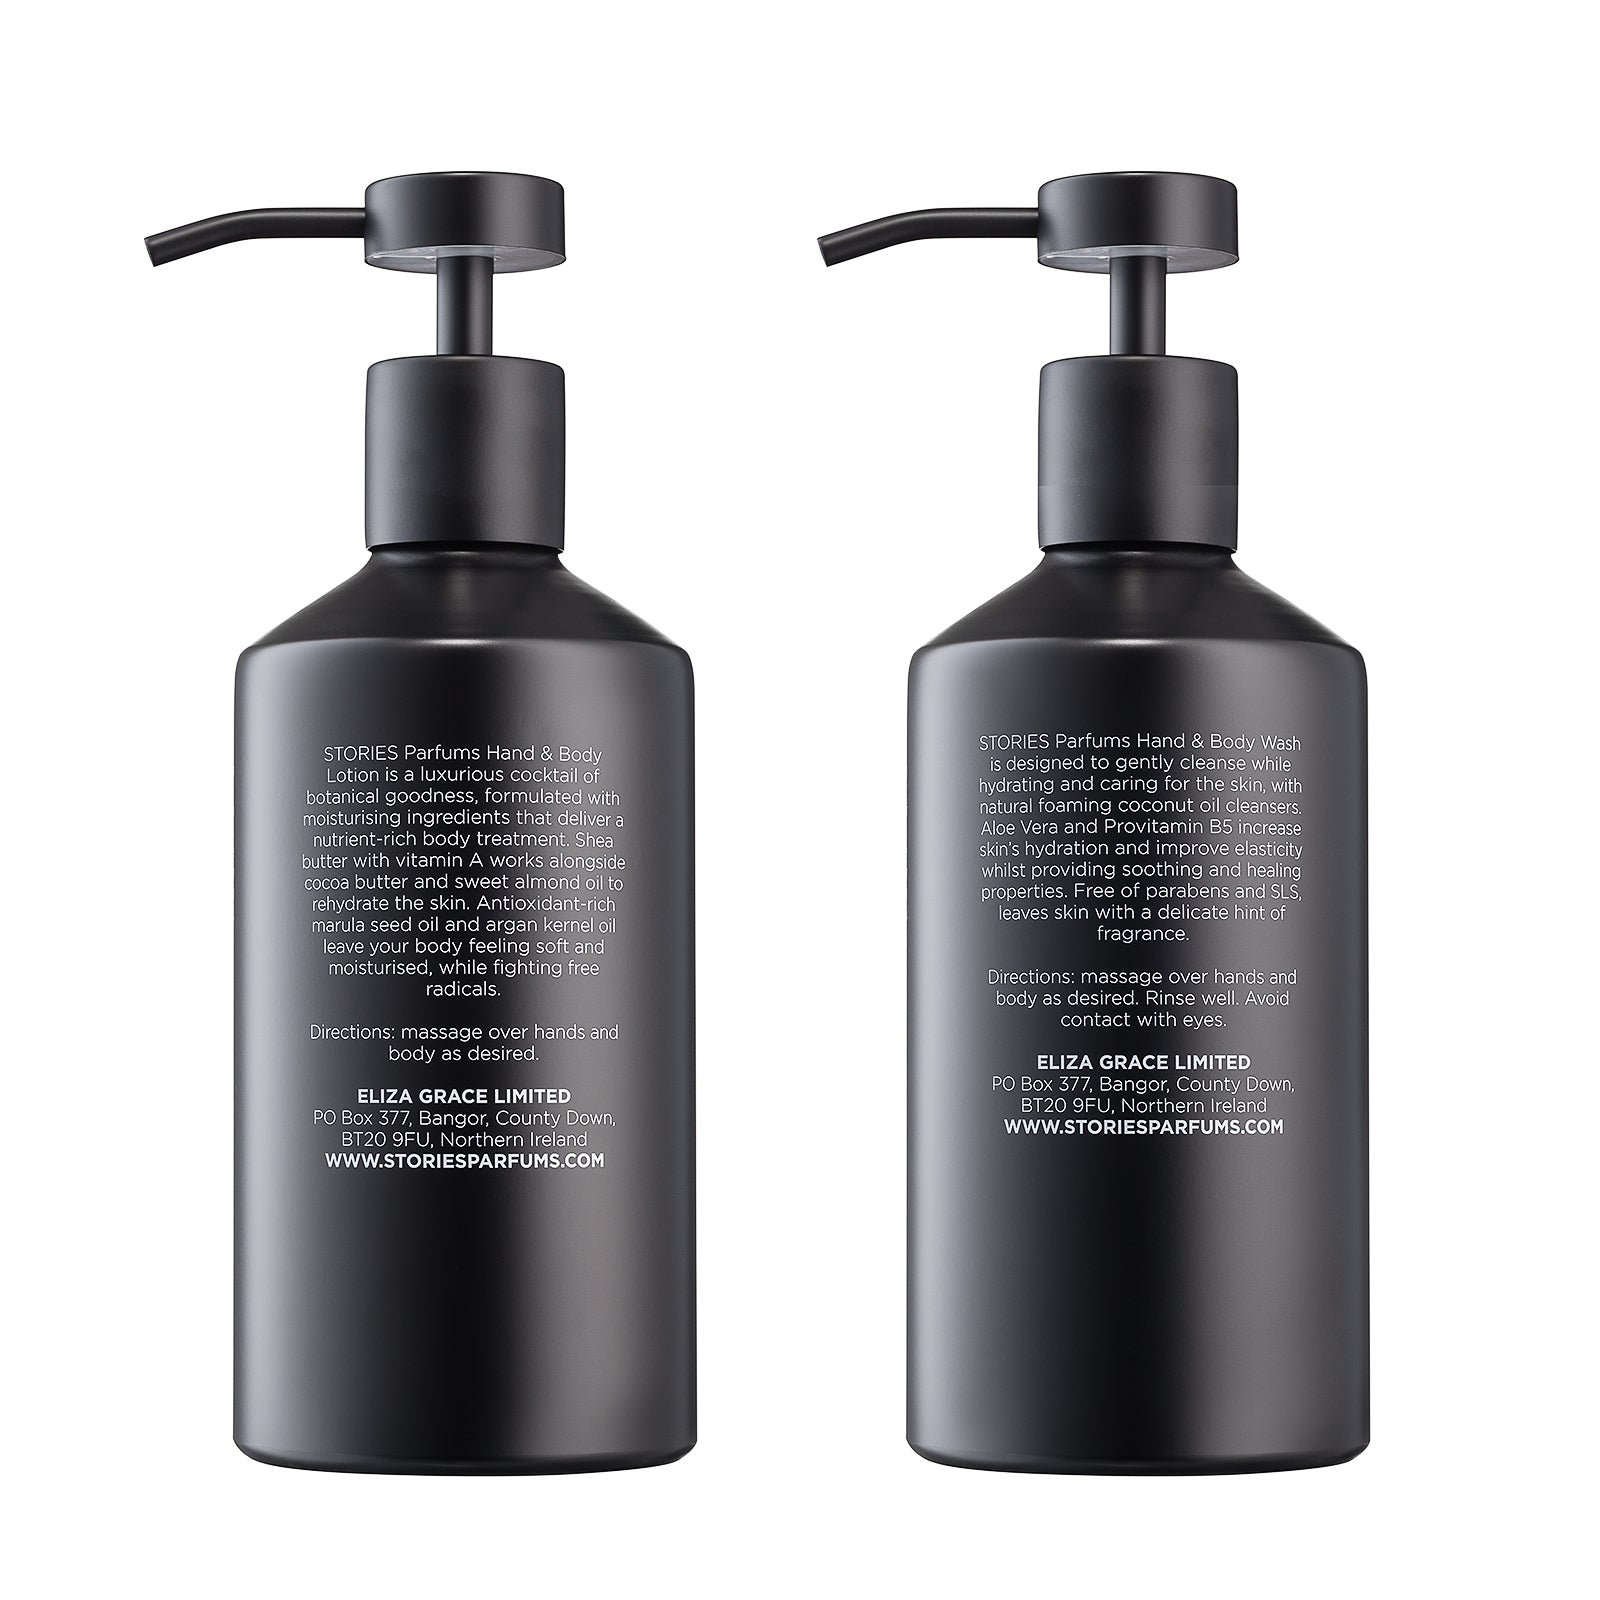 STORIES Nº.02 Hand & Body Care Duo